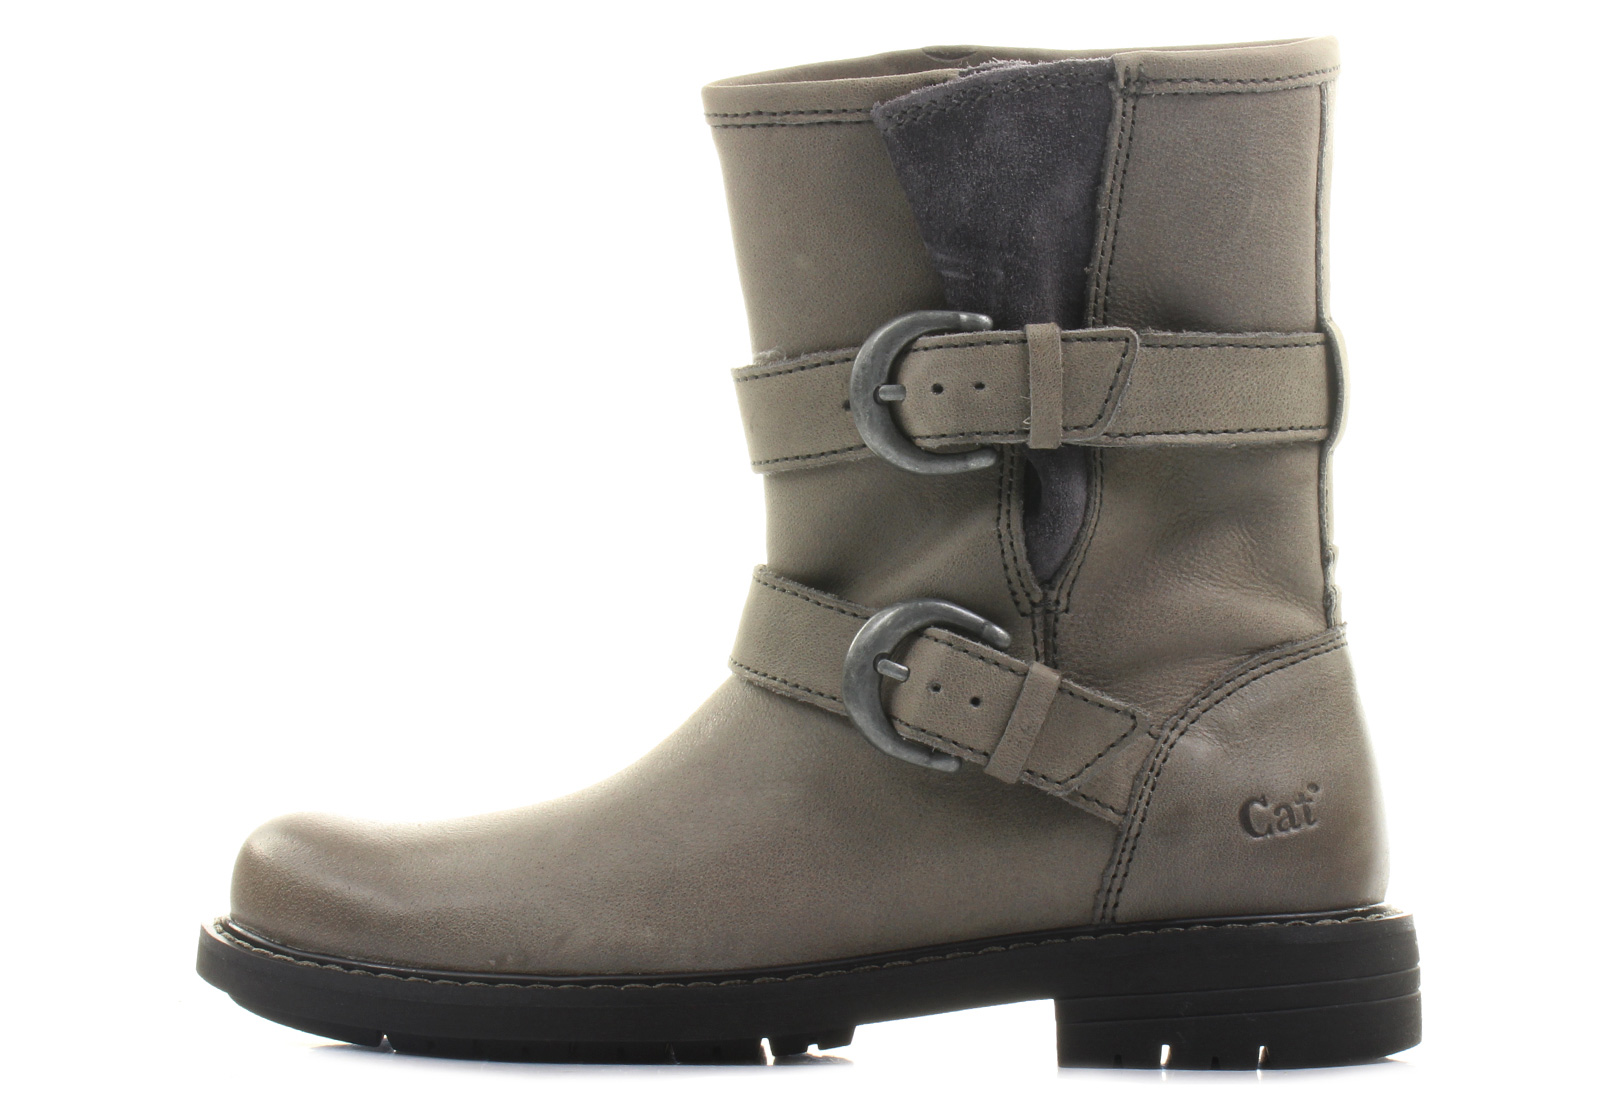 Cat Boots - Realist Hi - 308042-gry - Online shop for sneakers, shoes ...